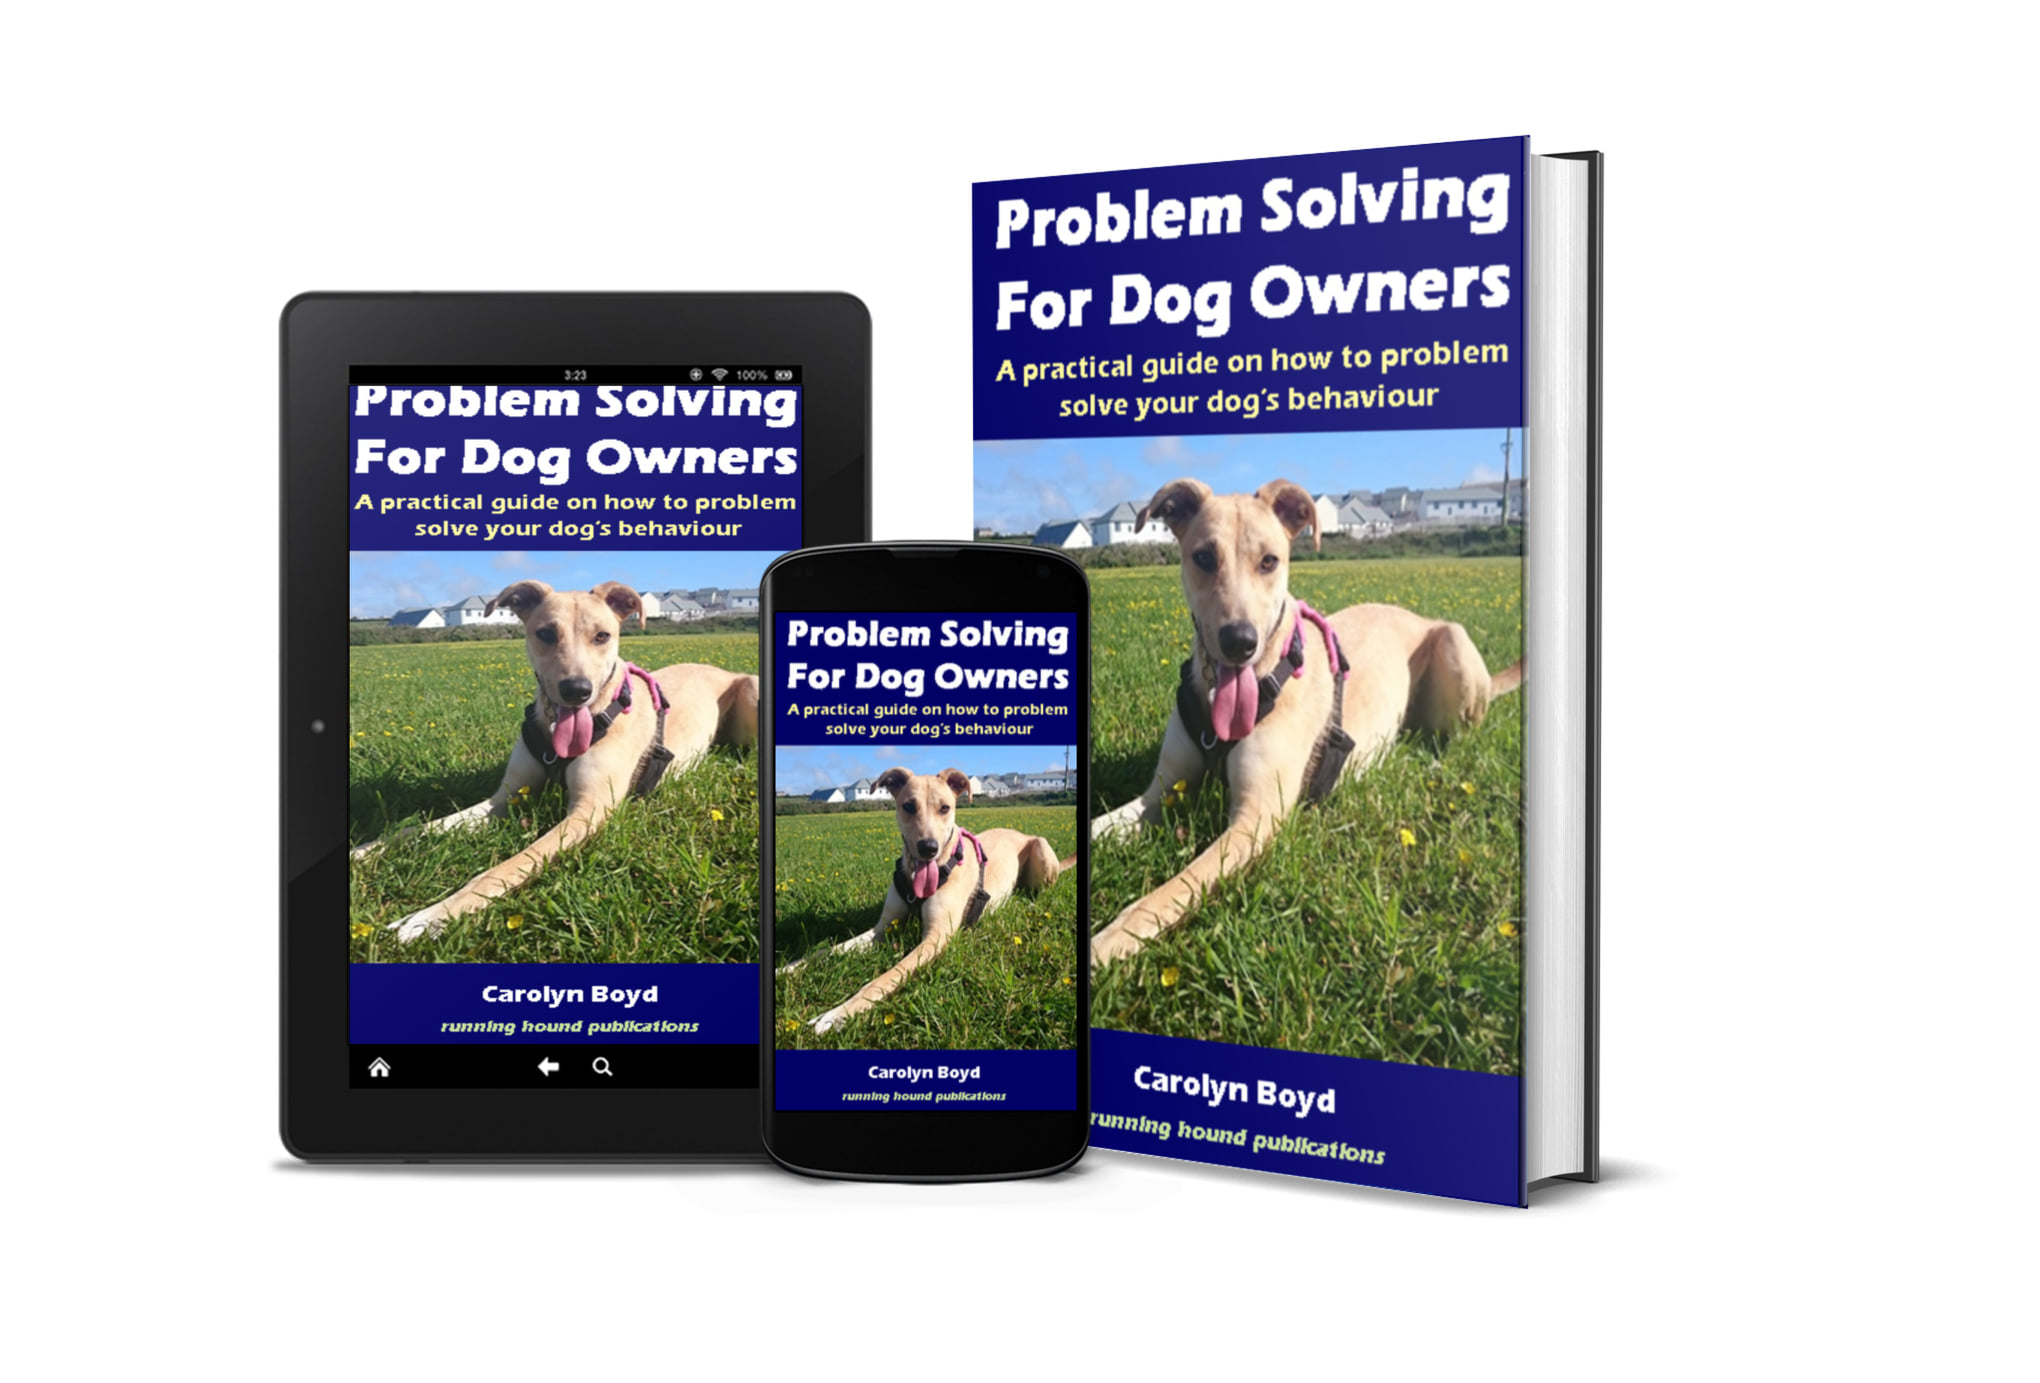 Problem Solving for Dog Owners: A practical guide on solving dog behaviour